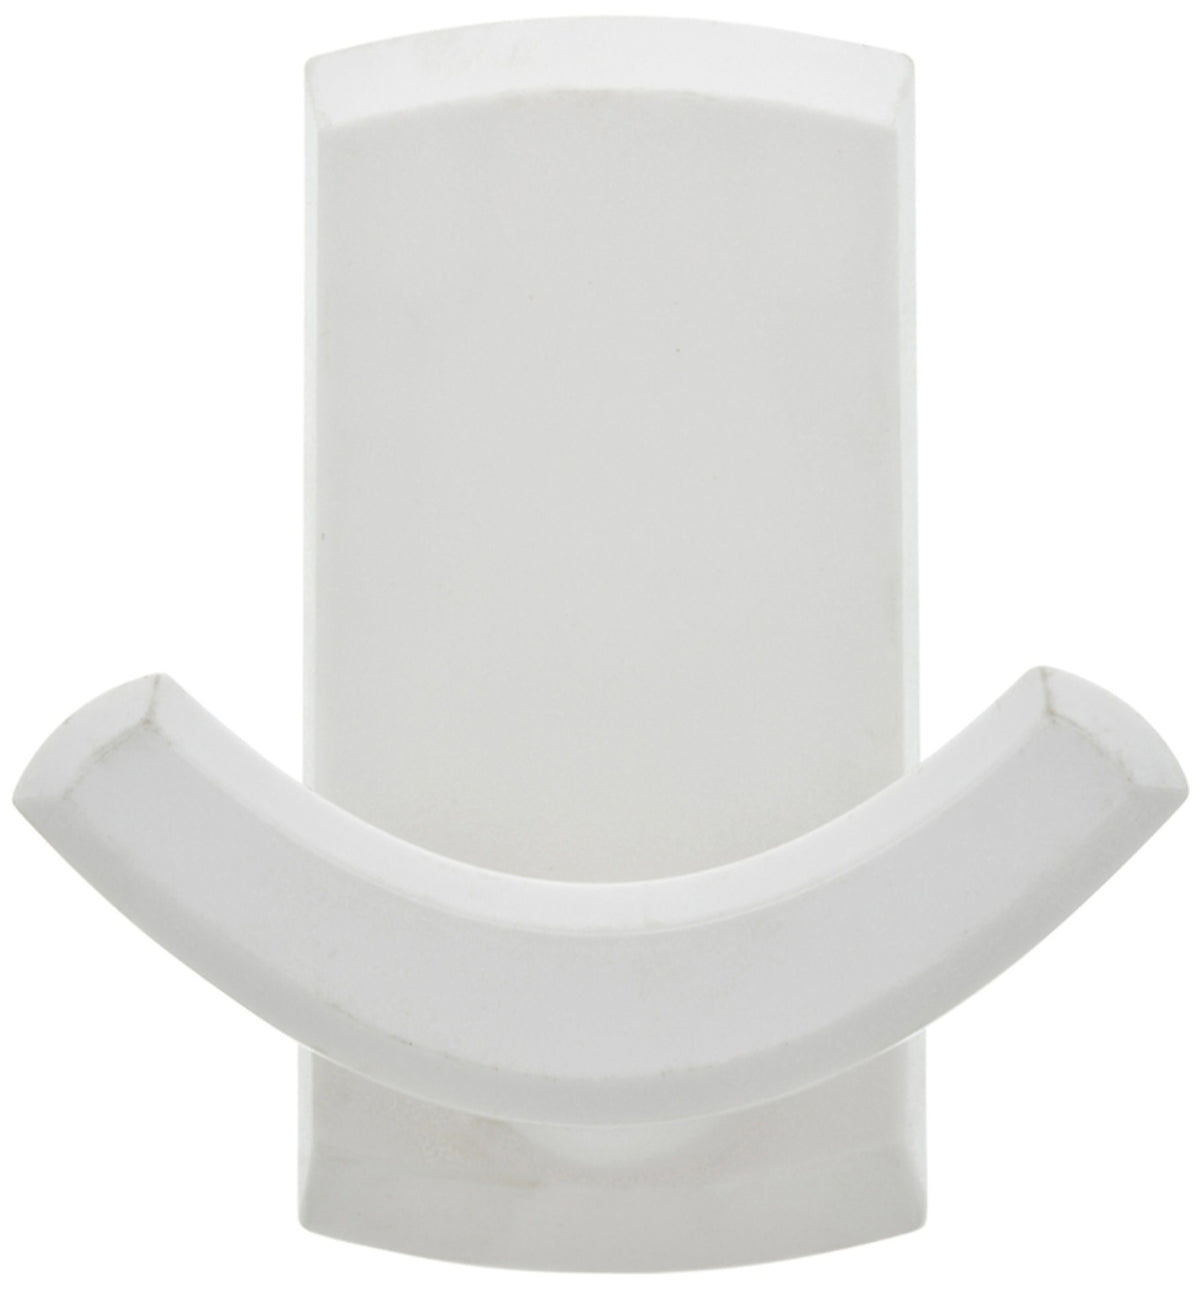 High & Mighty 515801 Decorative Hook, White